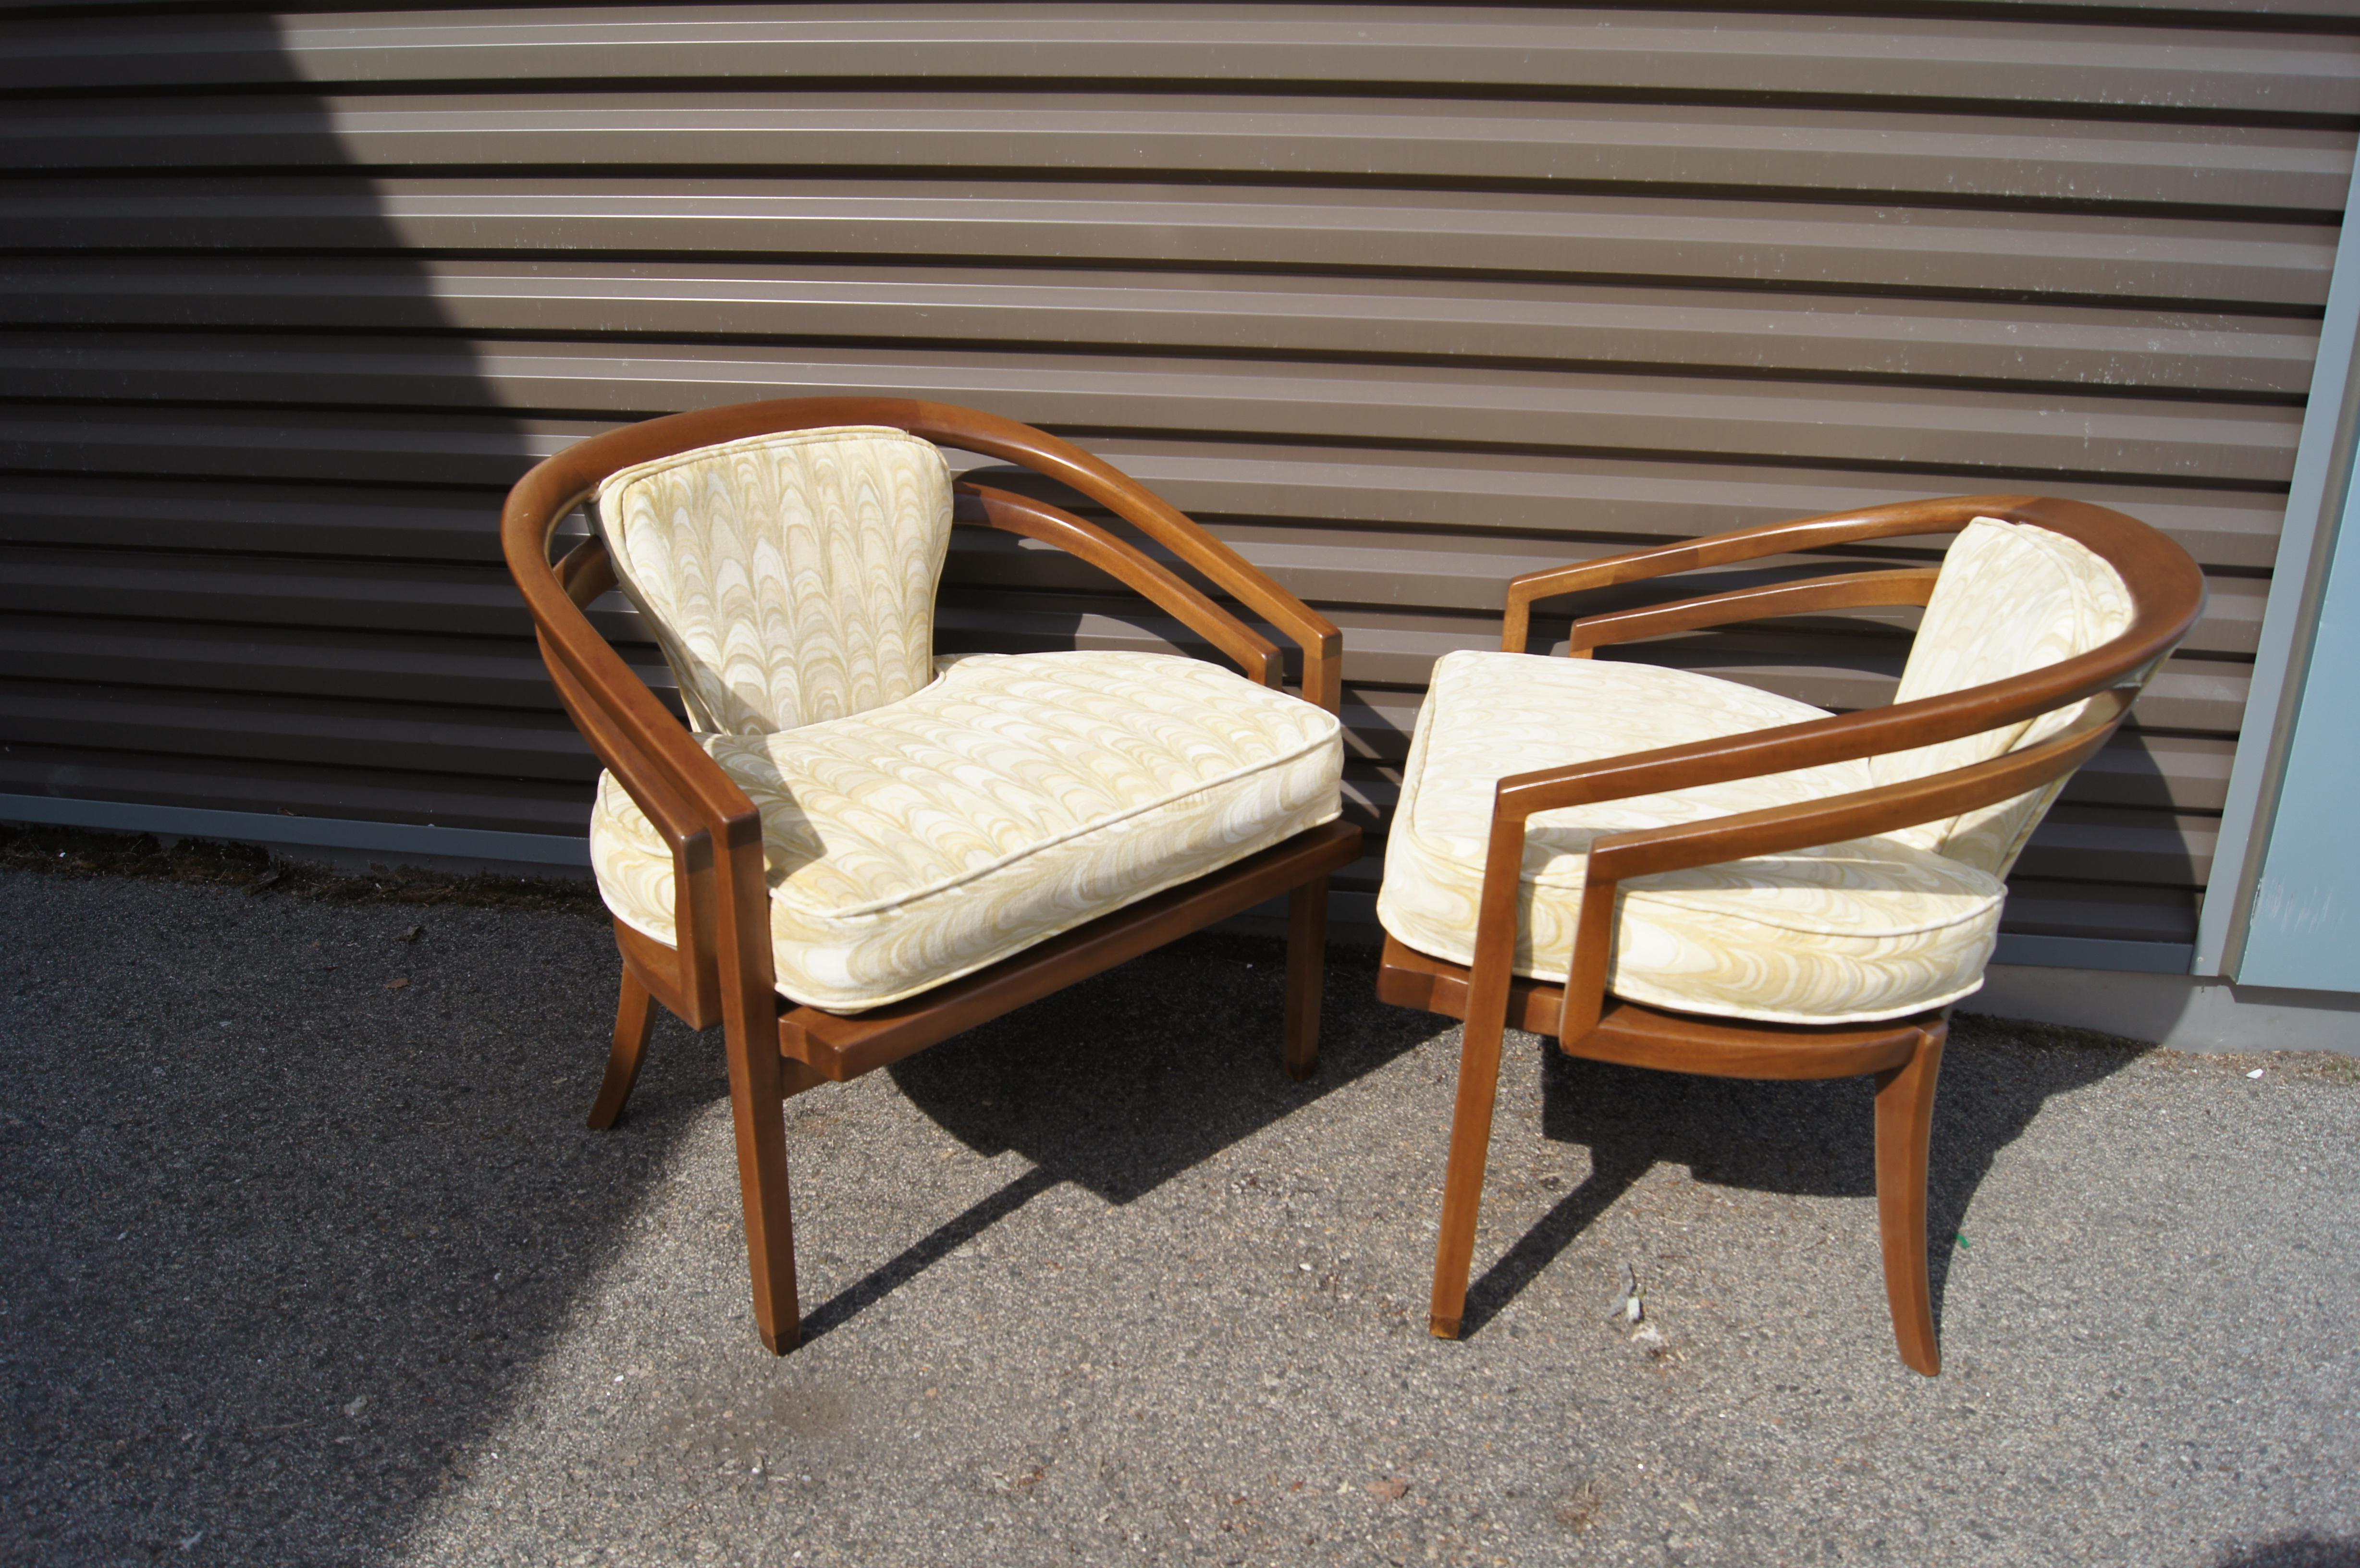 Pair of Wide Mahogany Armchairs by Baker with Jack Lenor Larsen Textile For Sale 6